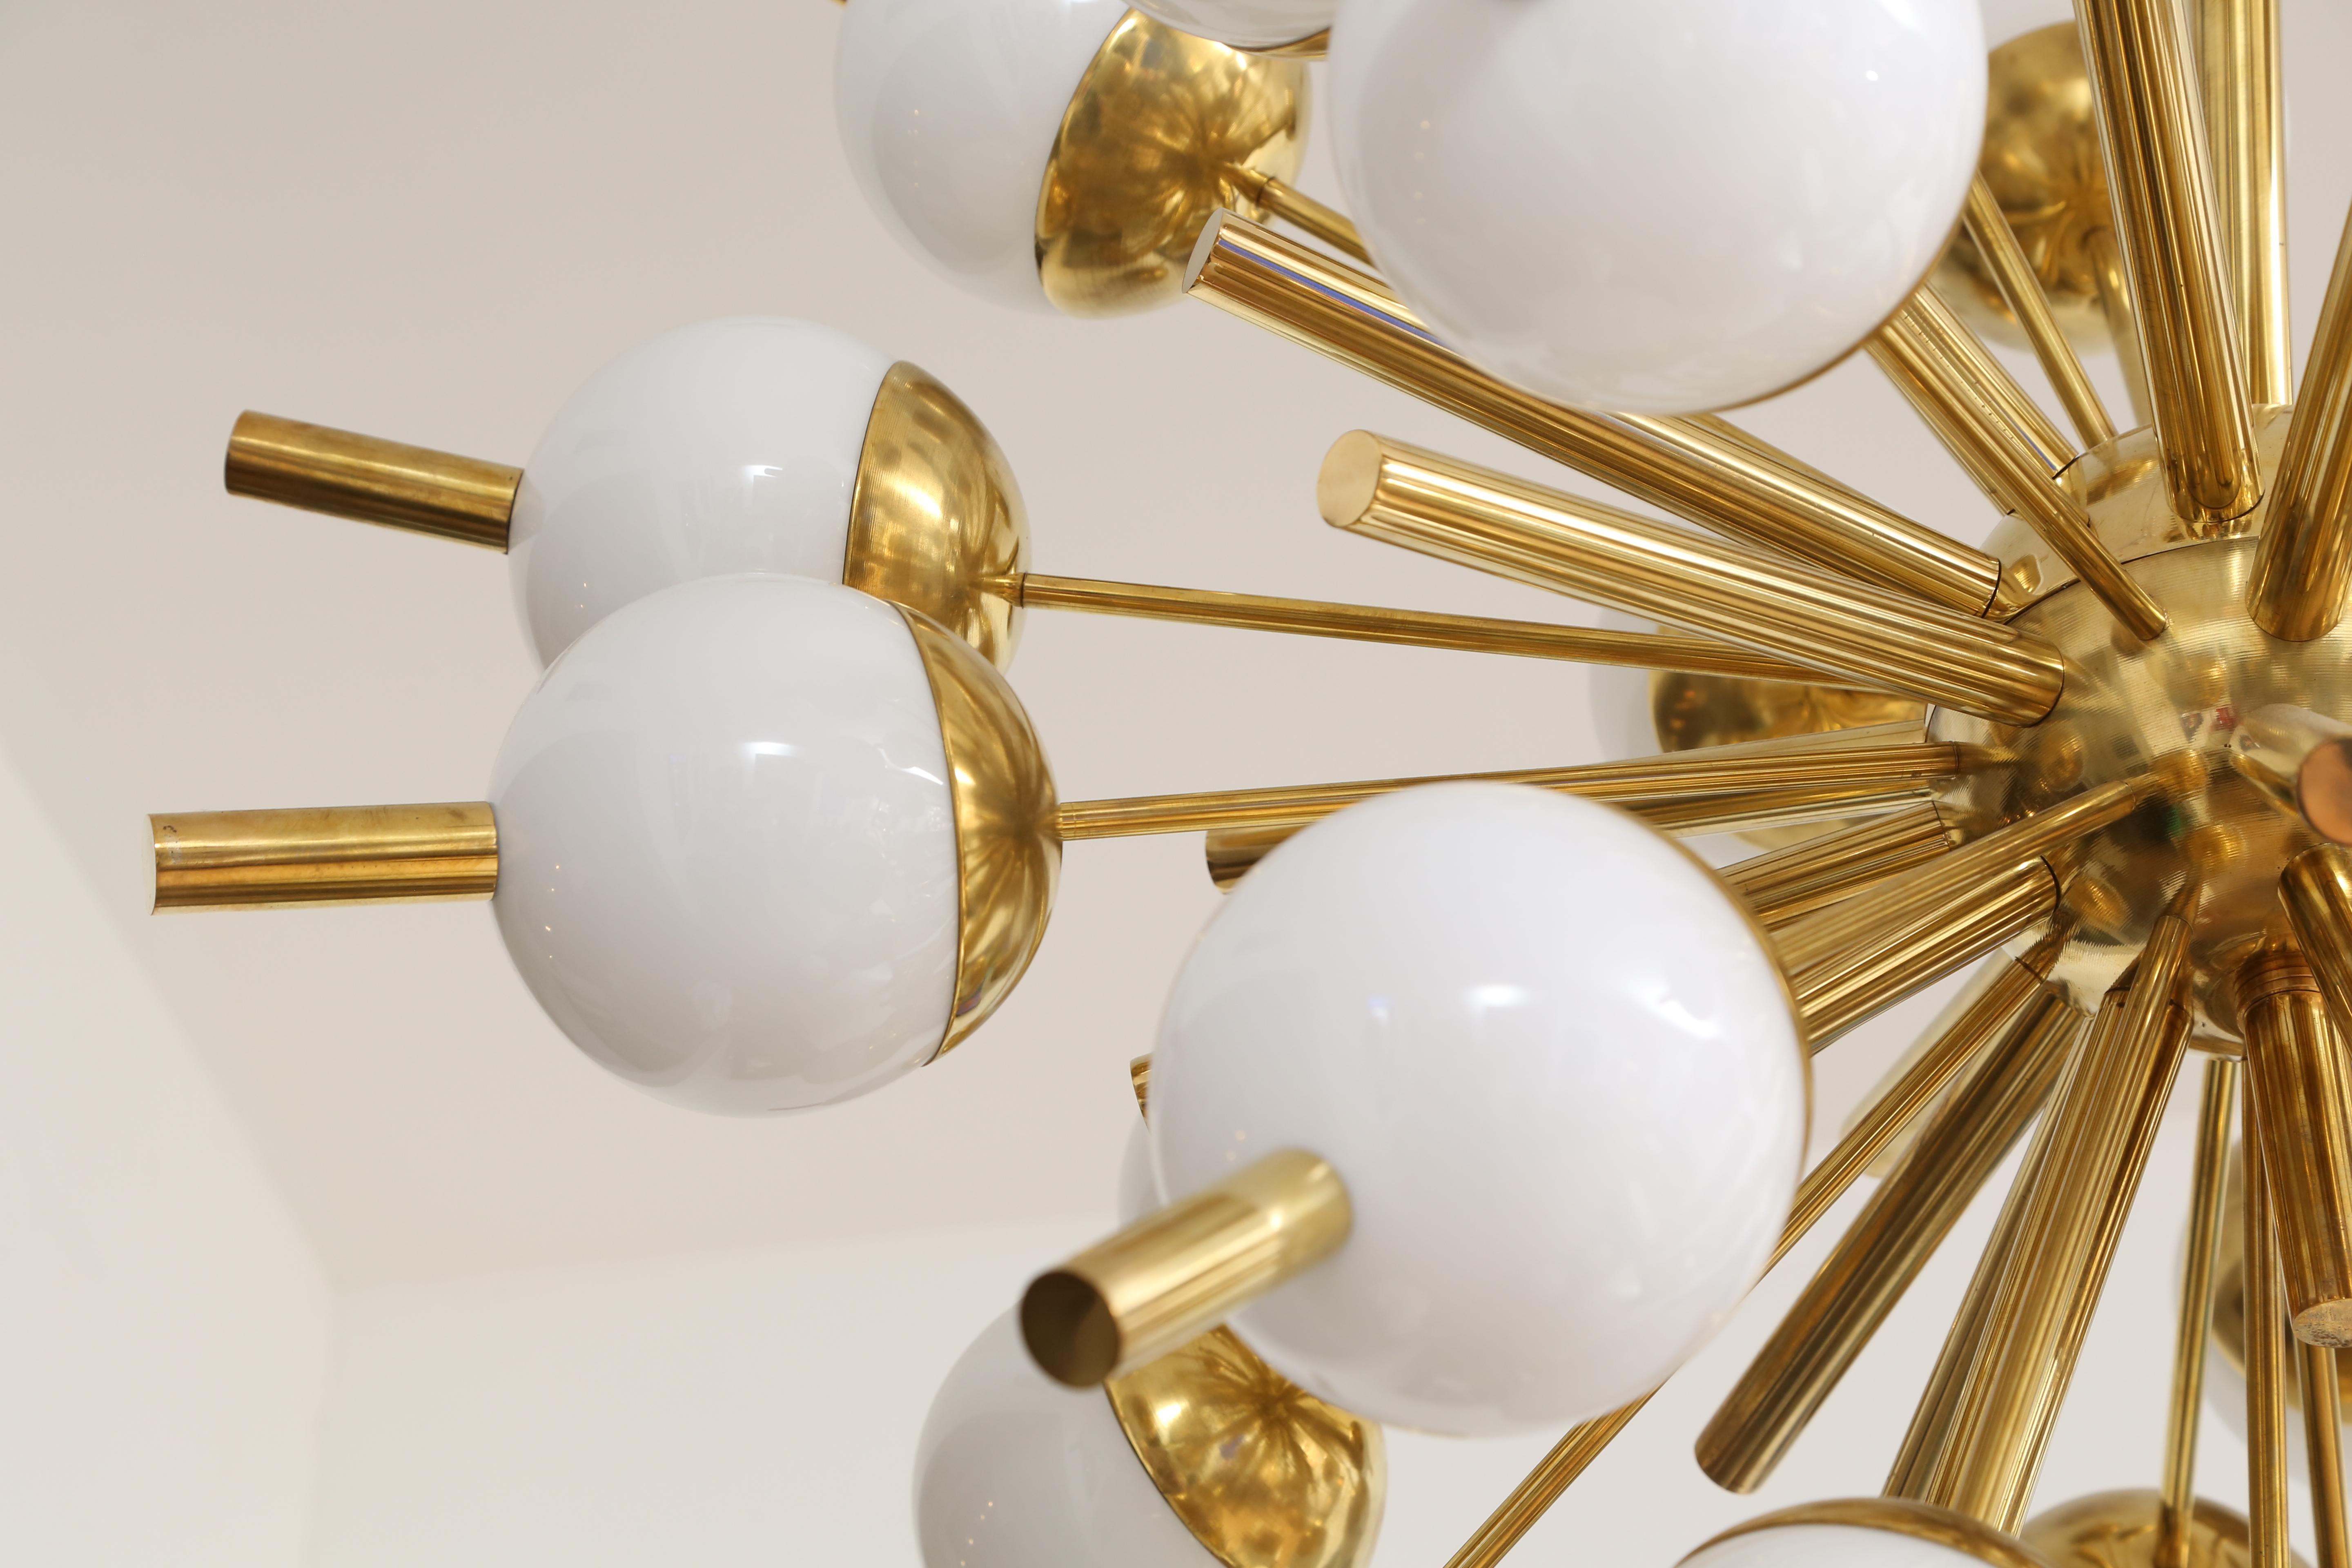 Large contemporary Italian sputnik chandelier, with brass structure and 30 white glass orbs. Drop can be adjusted to your own specification.
Pair available.